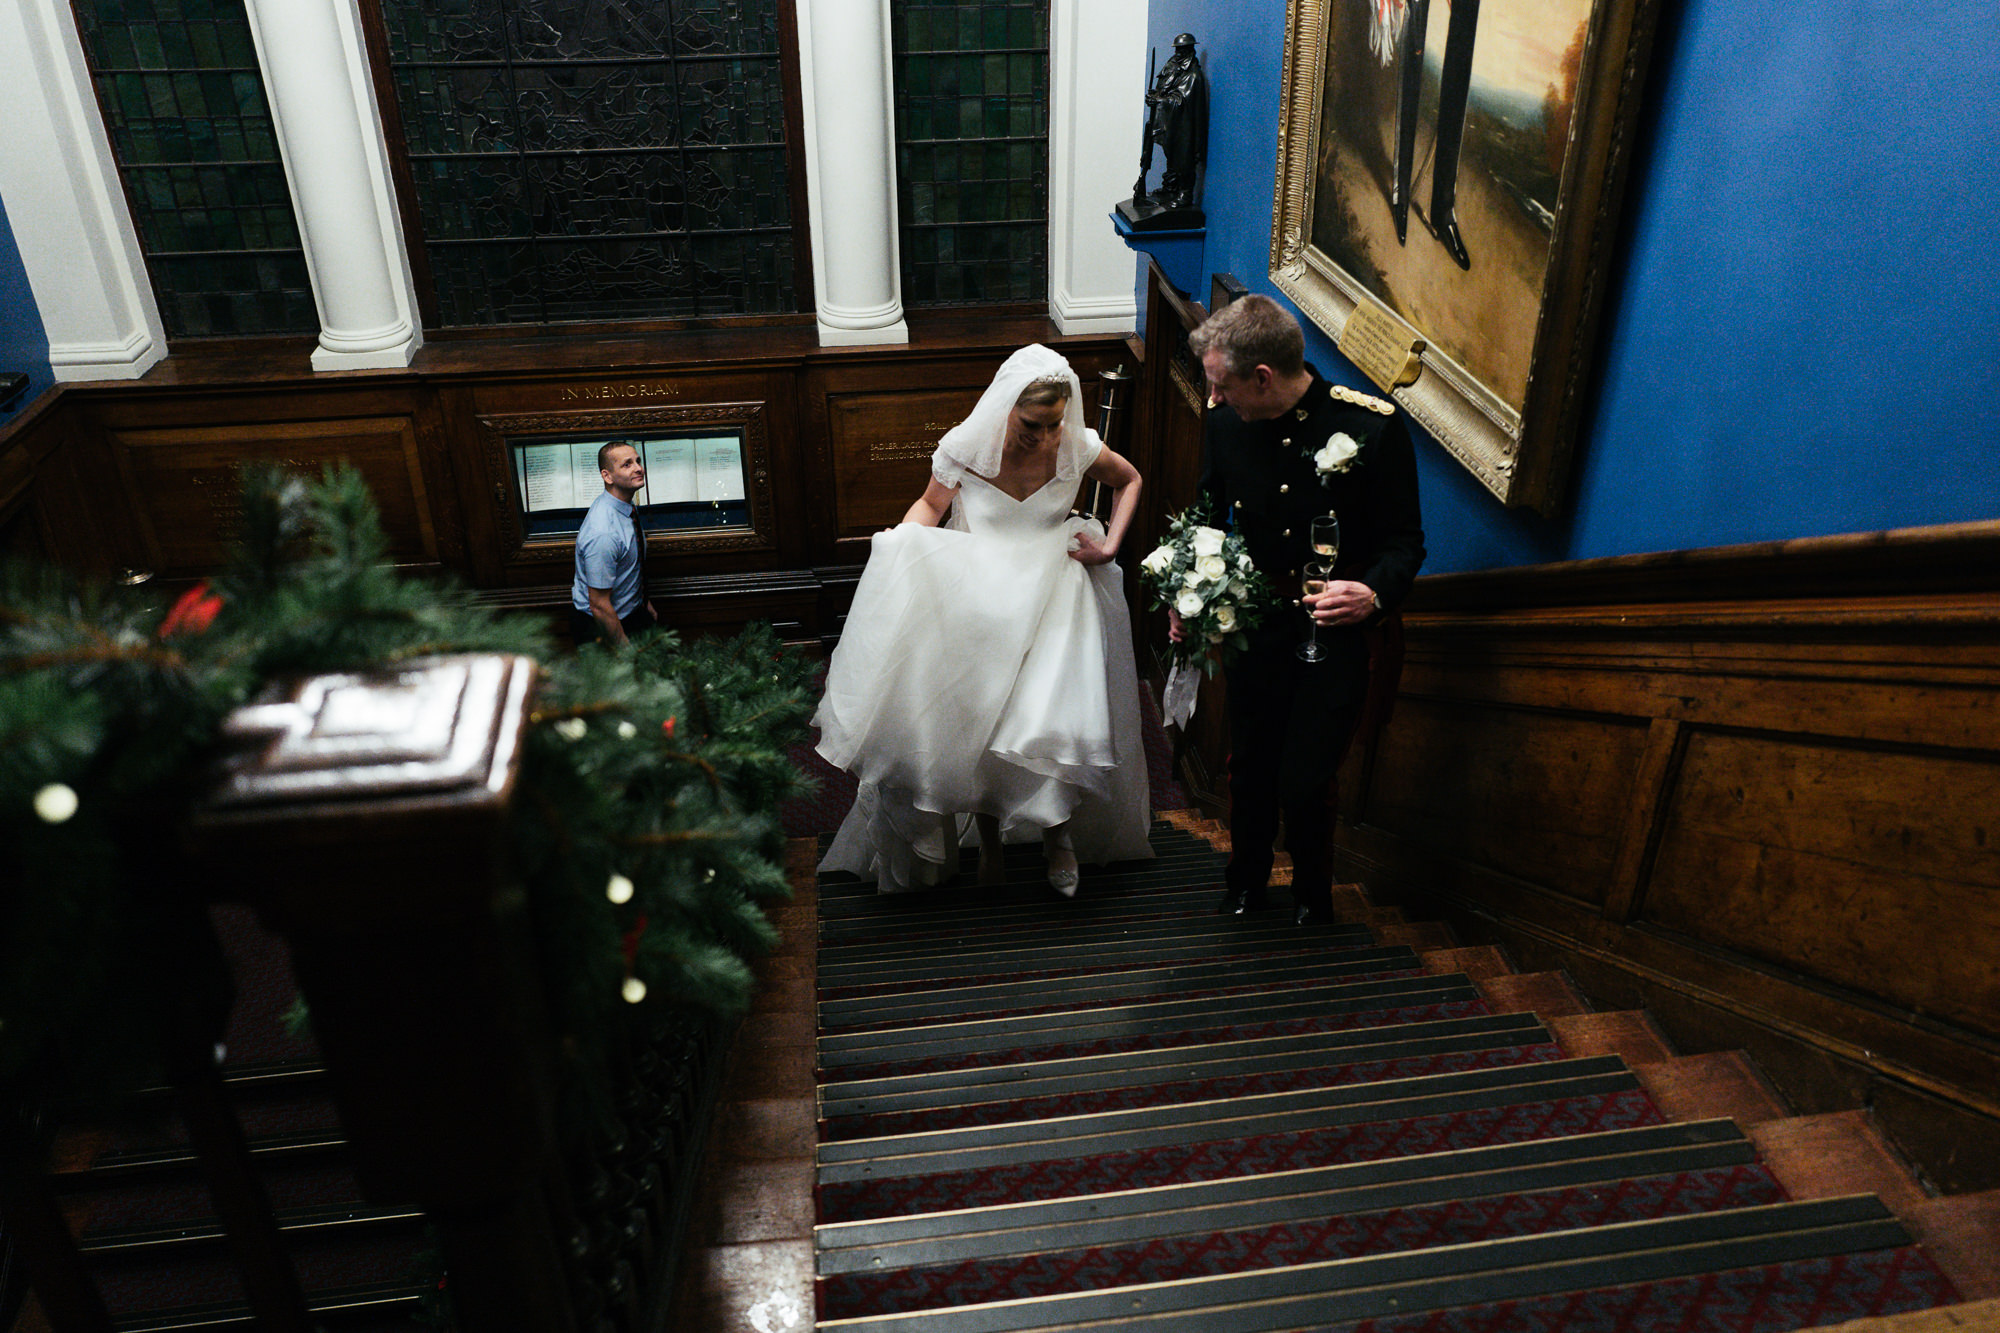 Weddings at The HAC